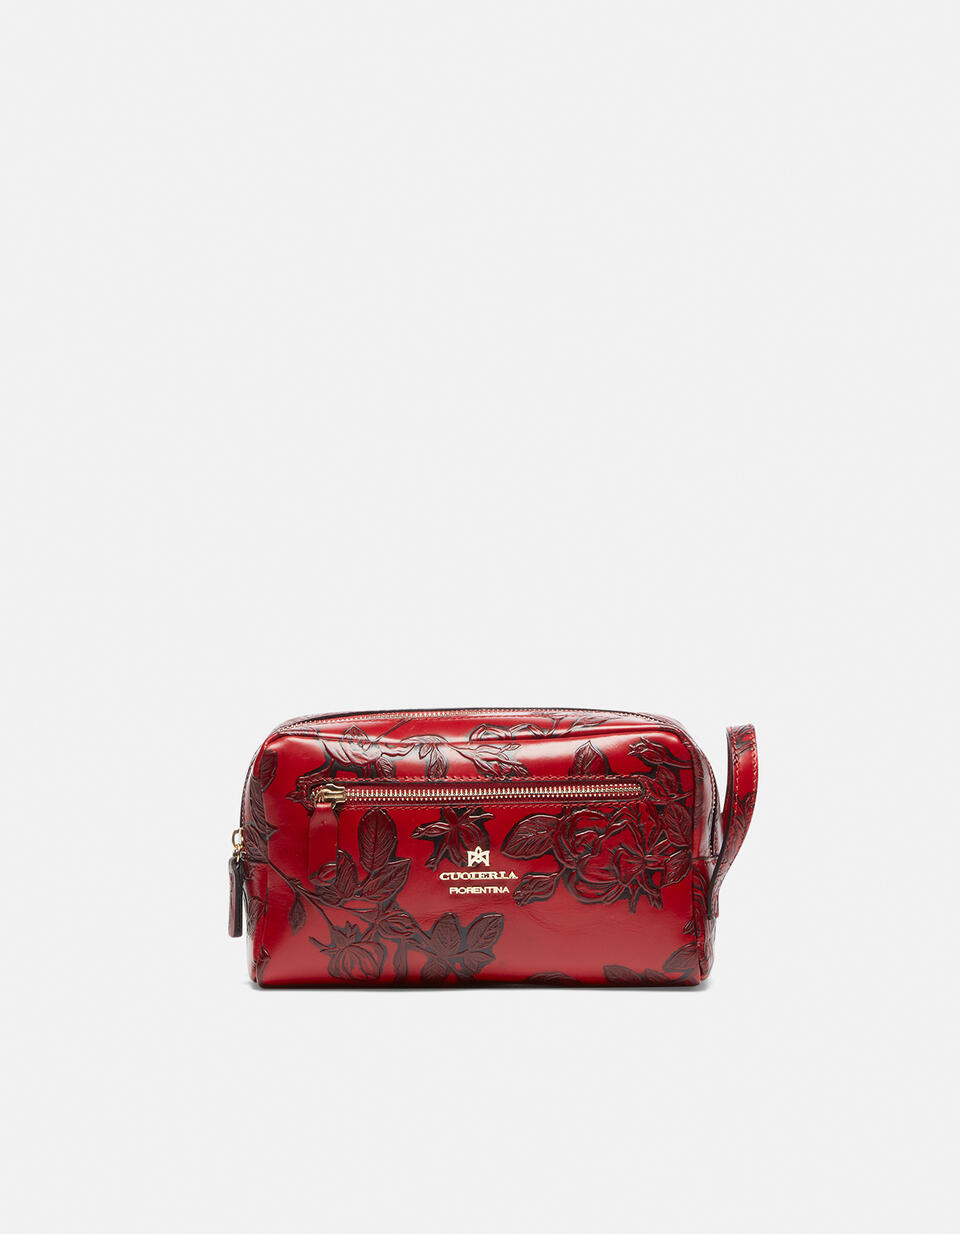 Beauty case with two compartments - Backpacks & Toiletry bag | TRAVEL BAGS ROSSO - Backpacks & Toiletry bag | TRAVEL BAGSCuoieria Fiorentina